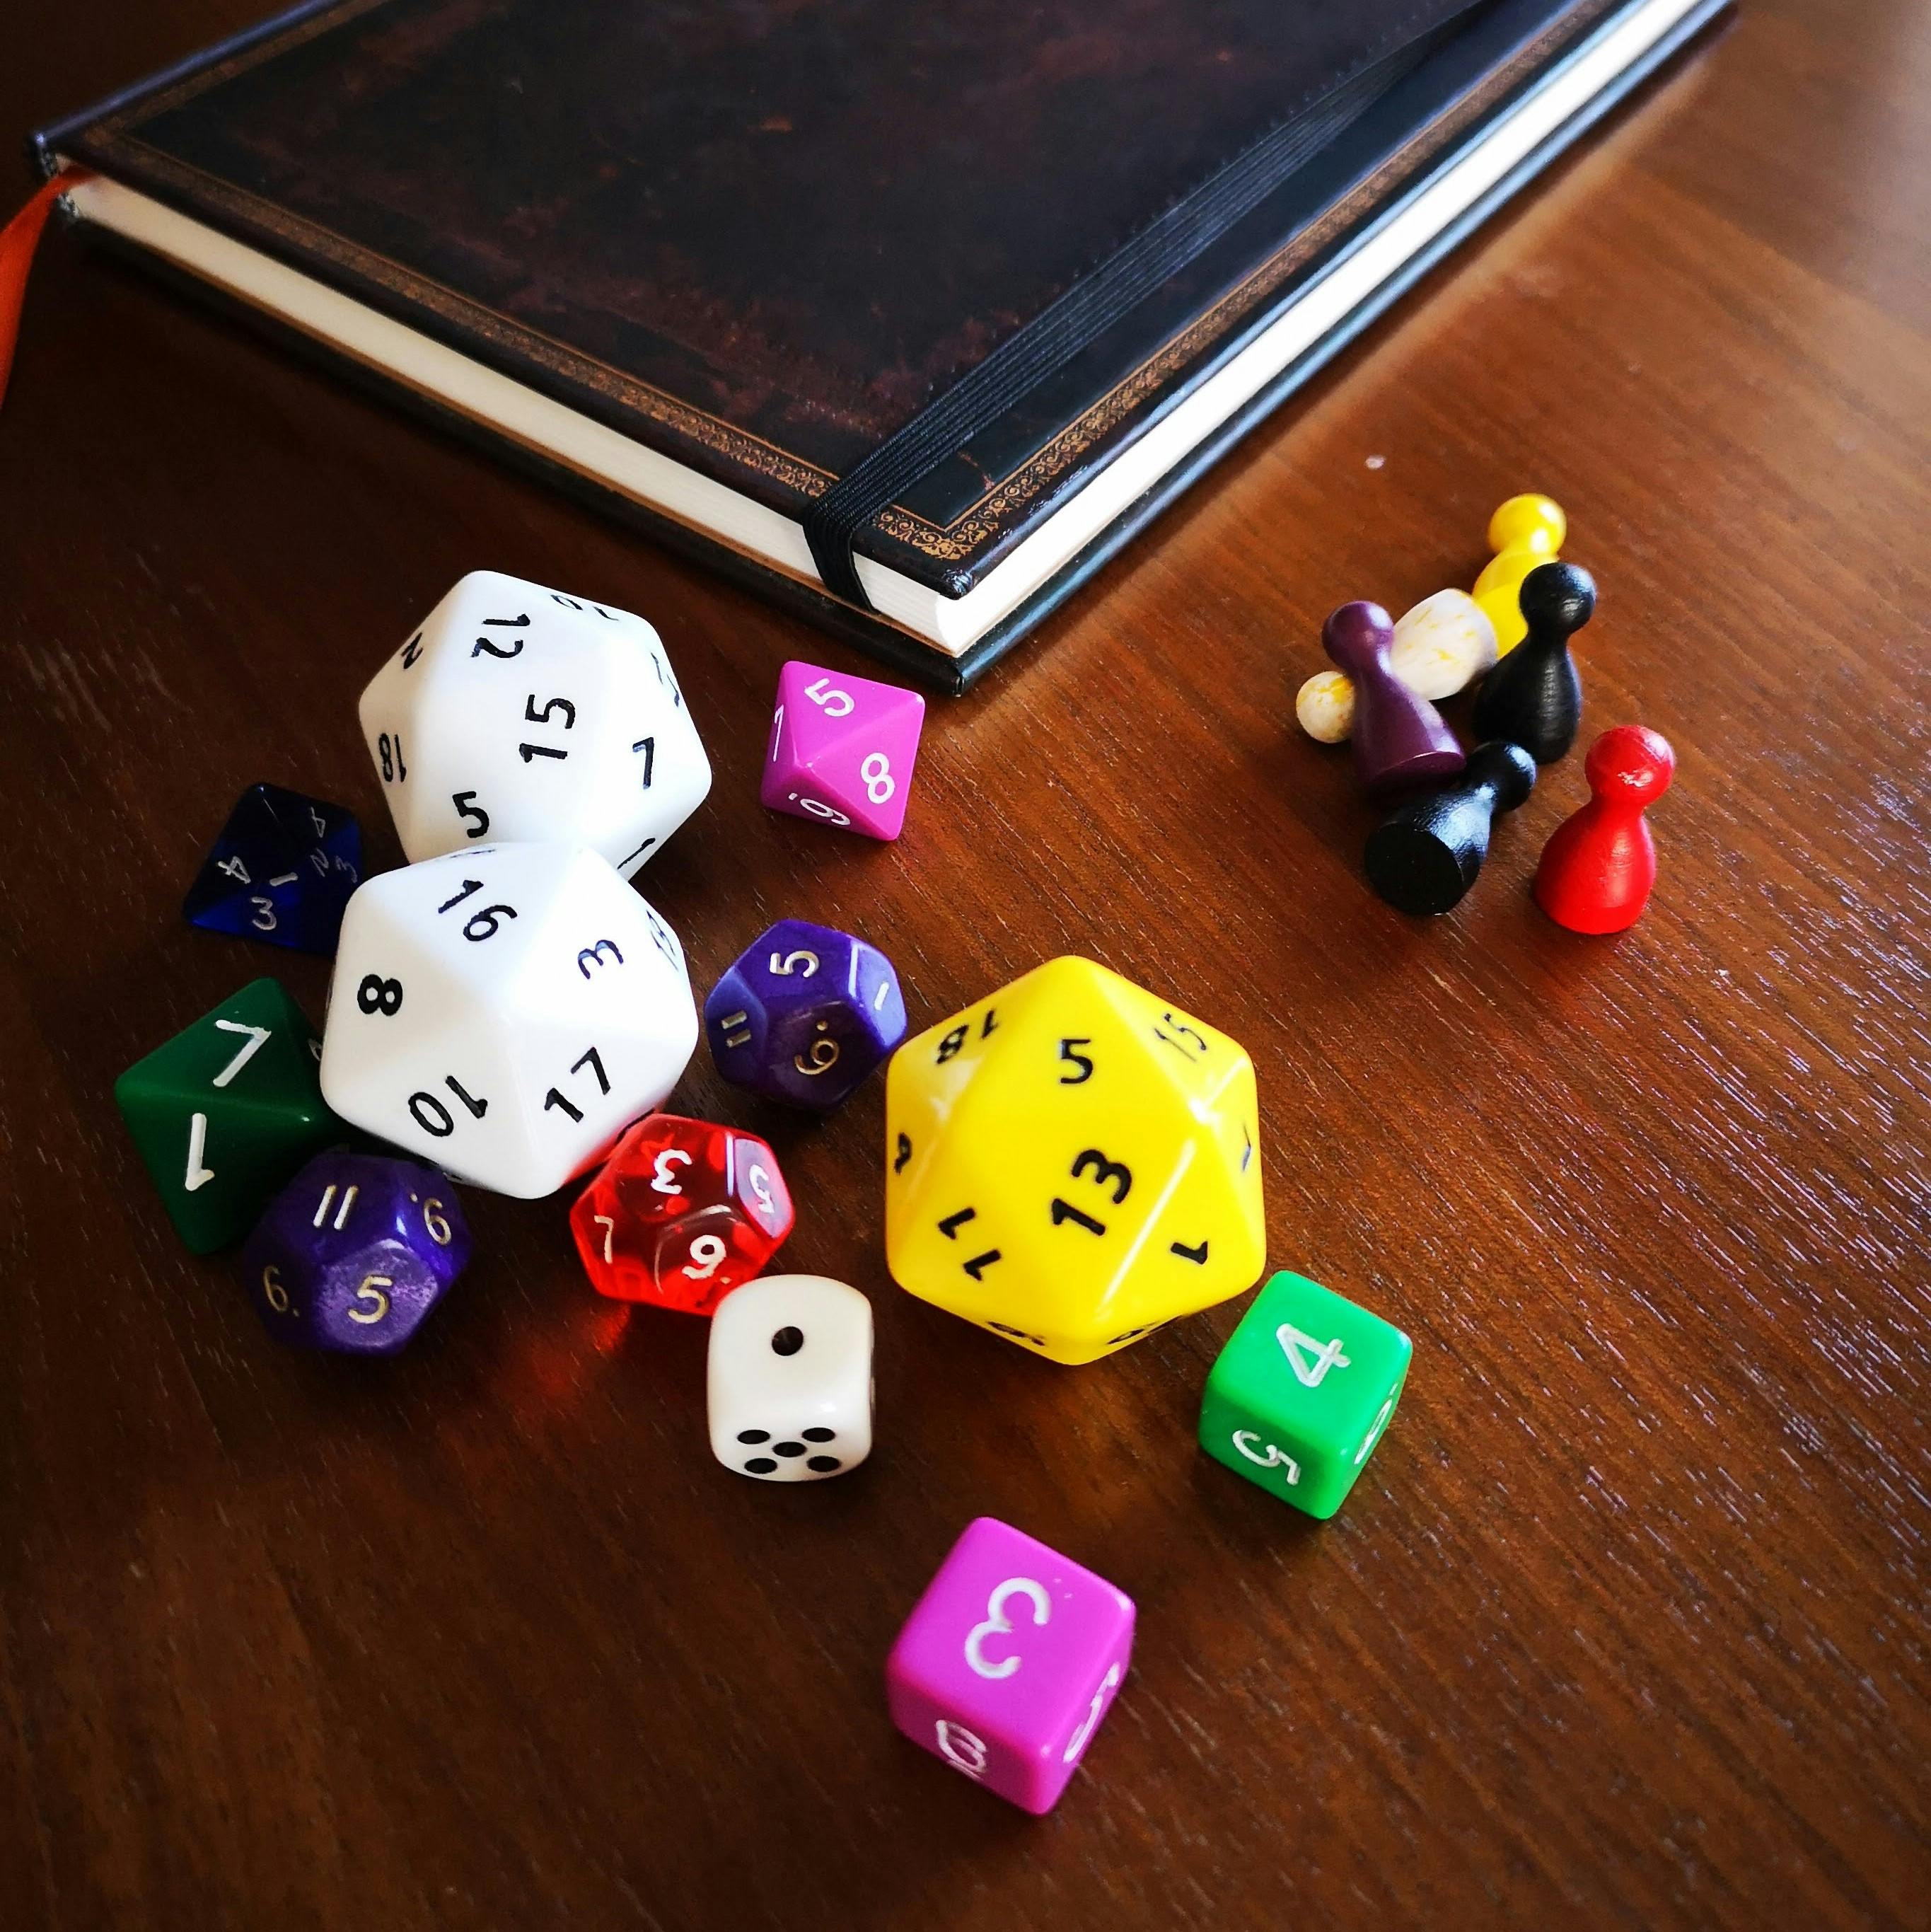 Dice and an old looking book